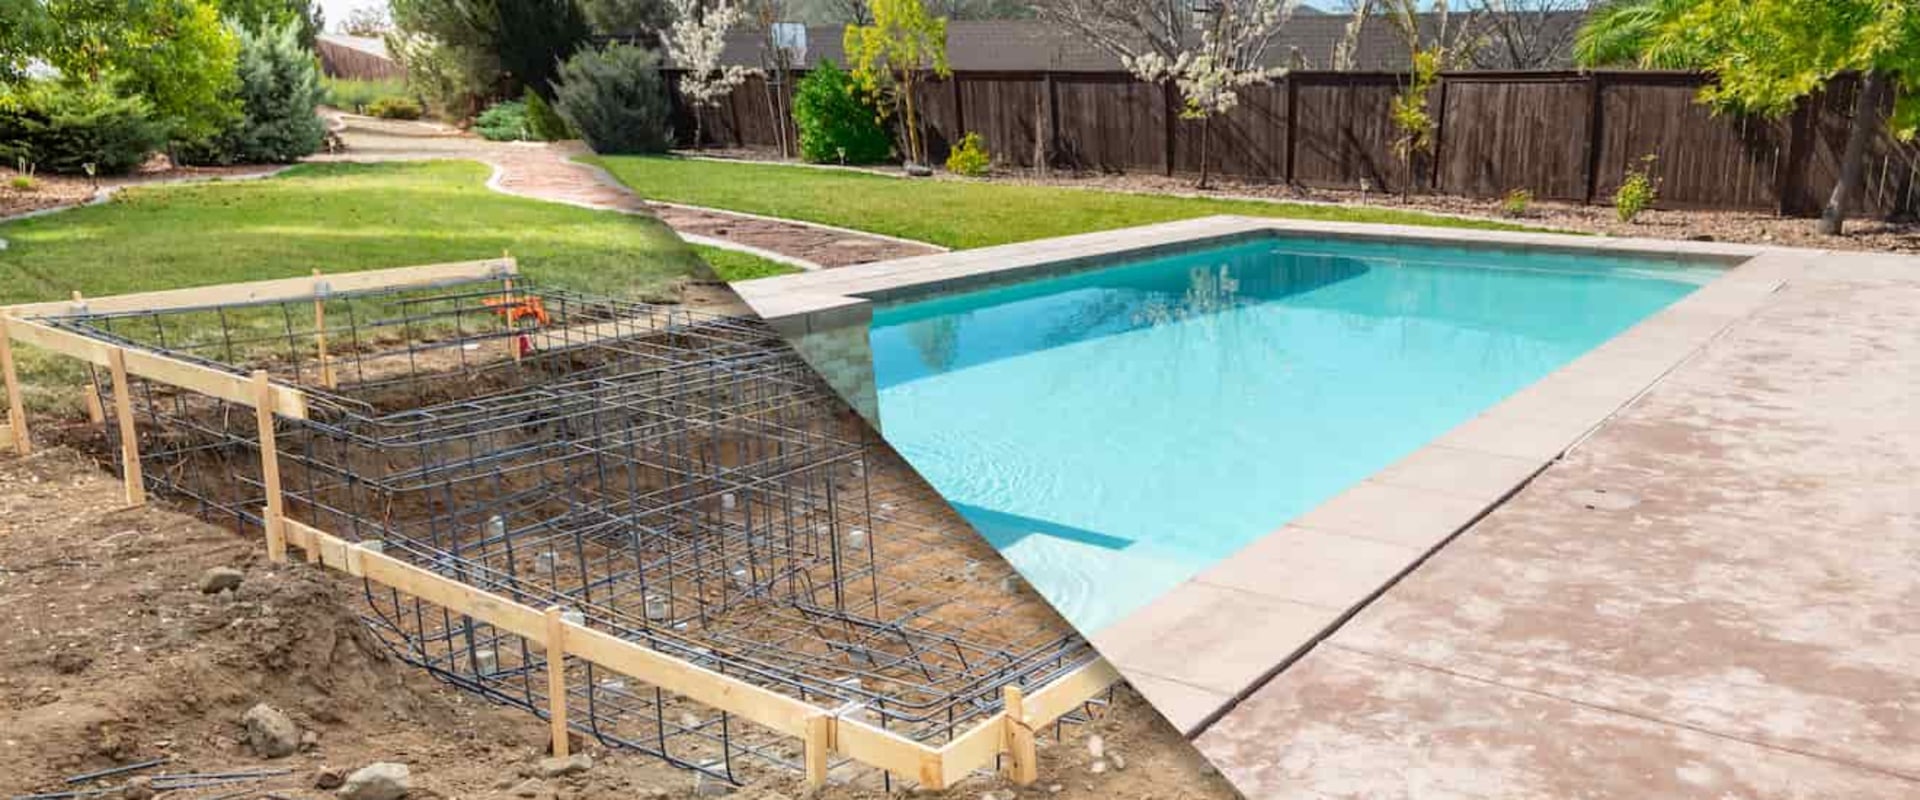 Pool Stores in Dallas County, TX: Where to Find Pool Safety Equipment